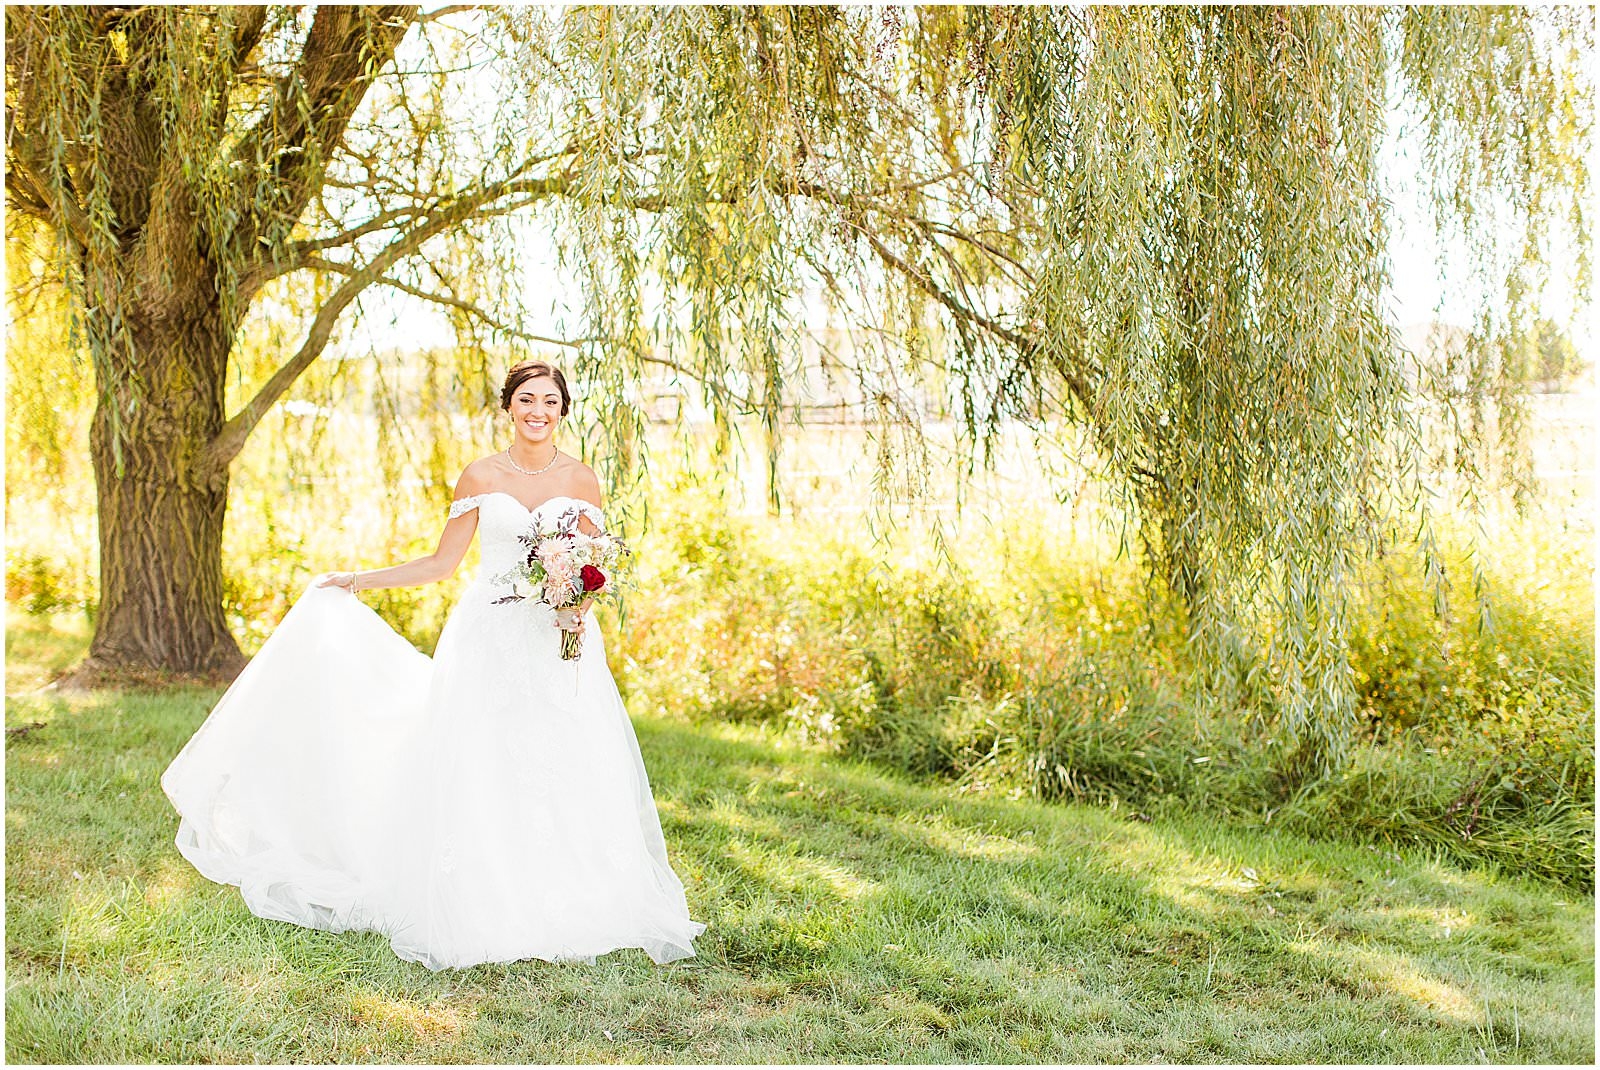 A Stunning Fall Wedding in Indianapolis, IN |. Sally and Andrew | Bret and Brandie Photography 0089.jpg